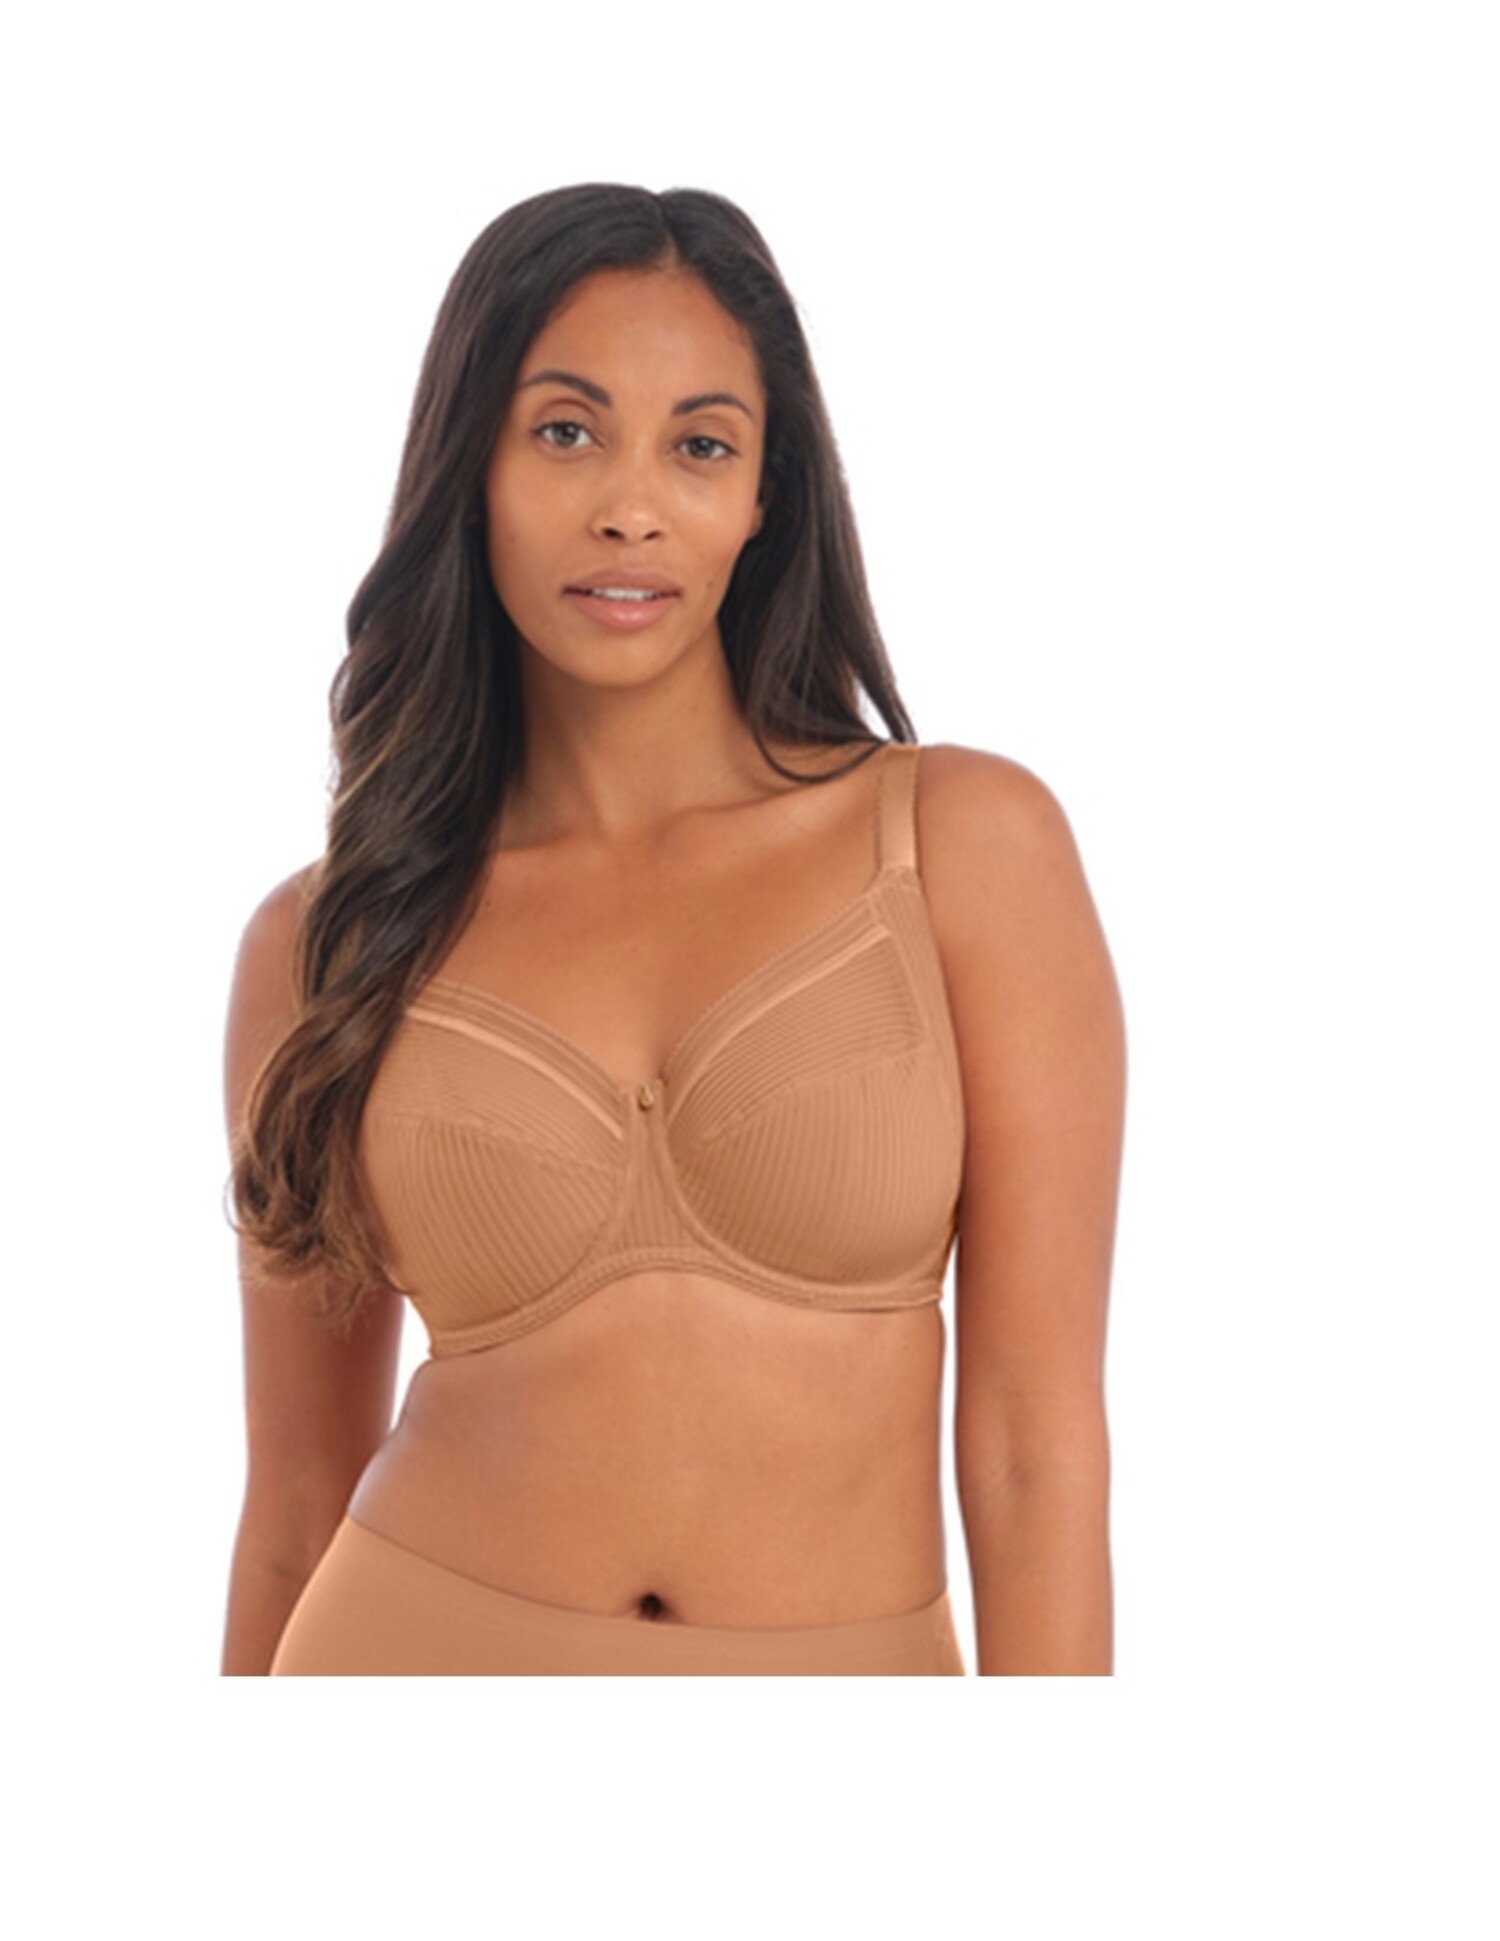 Fusion Navy Full Cup Side Support Bra from Fantasie